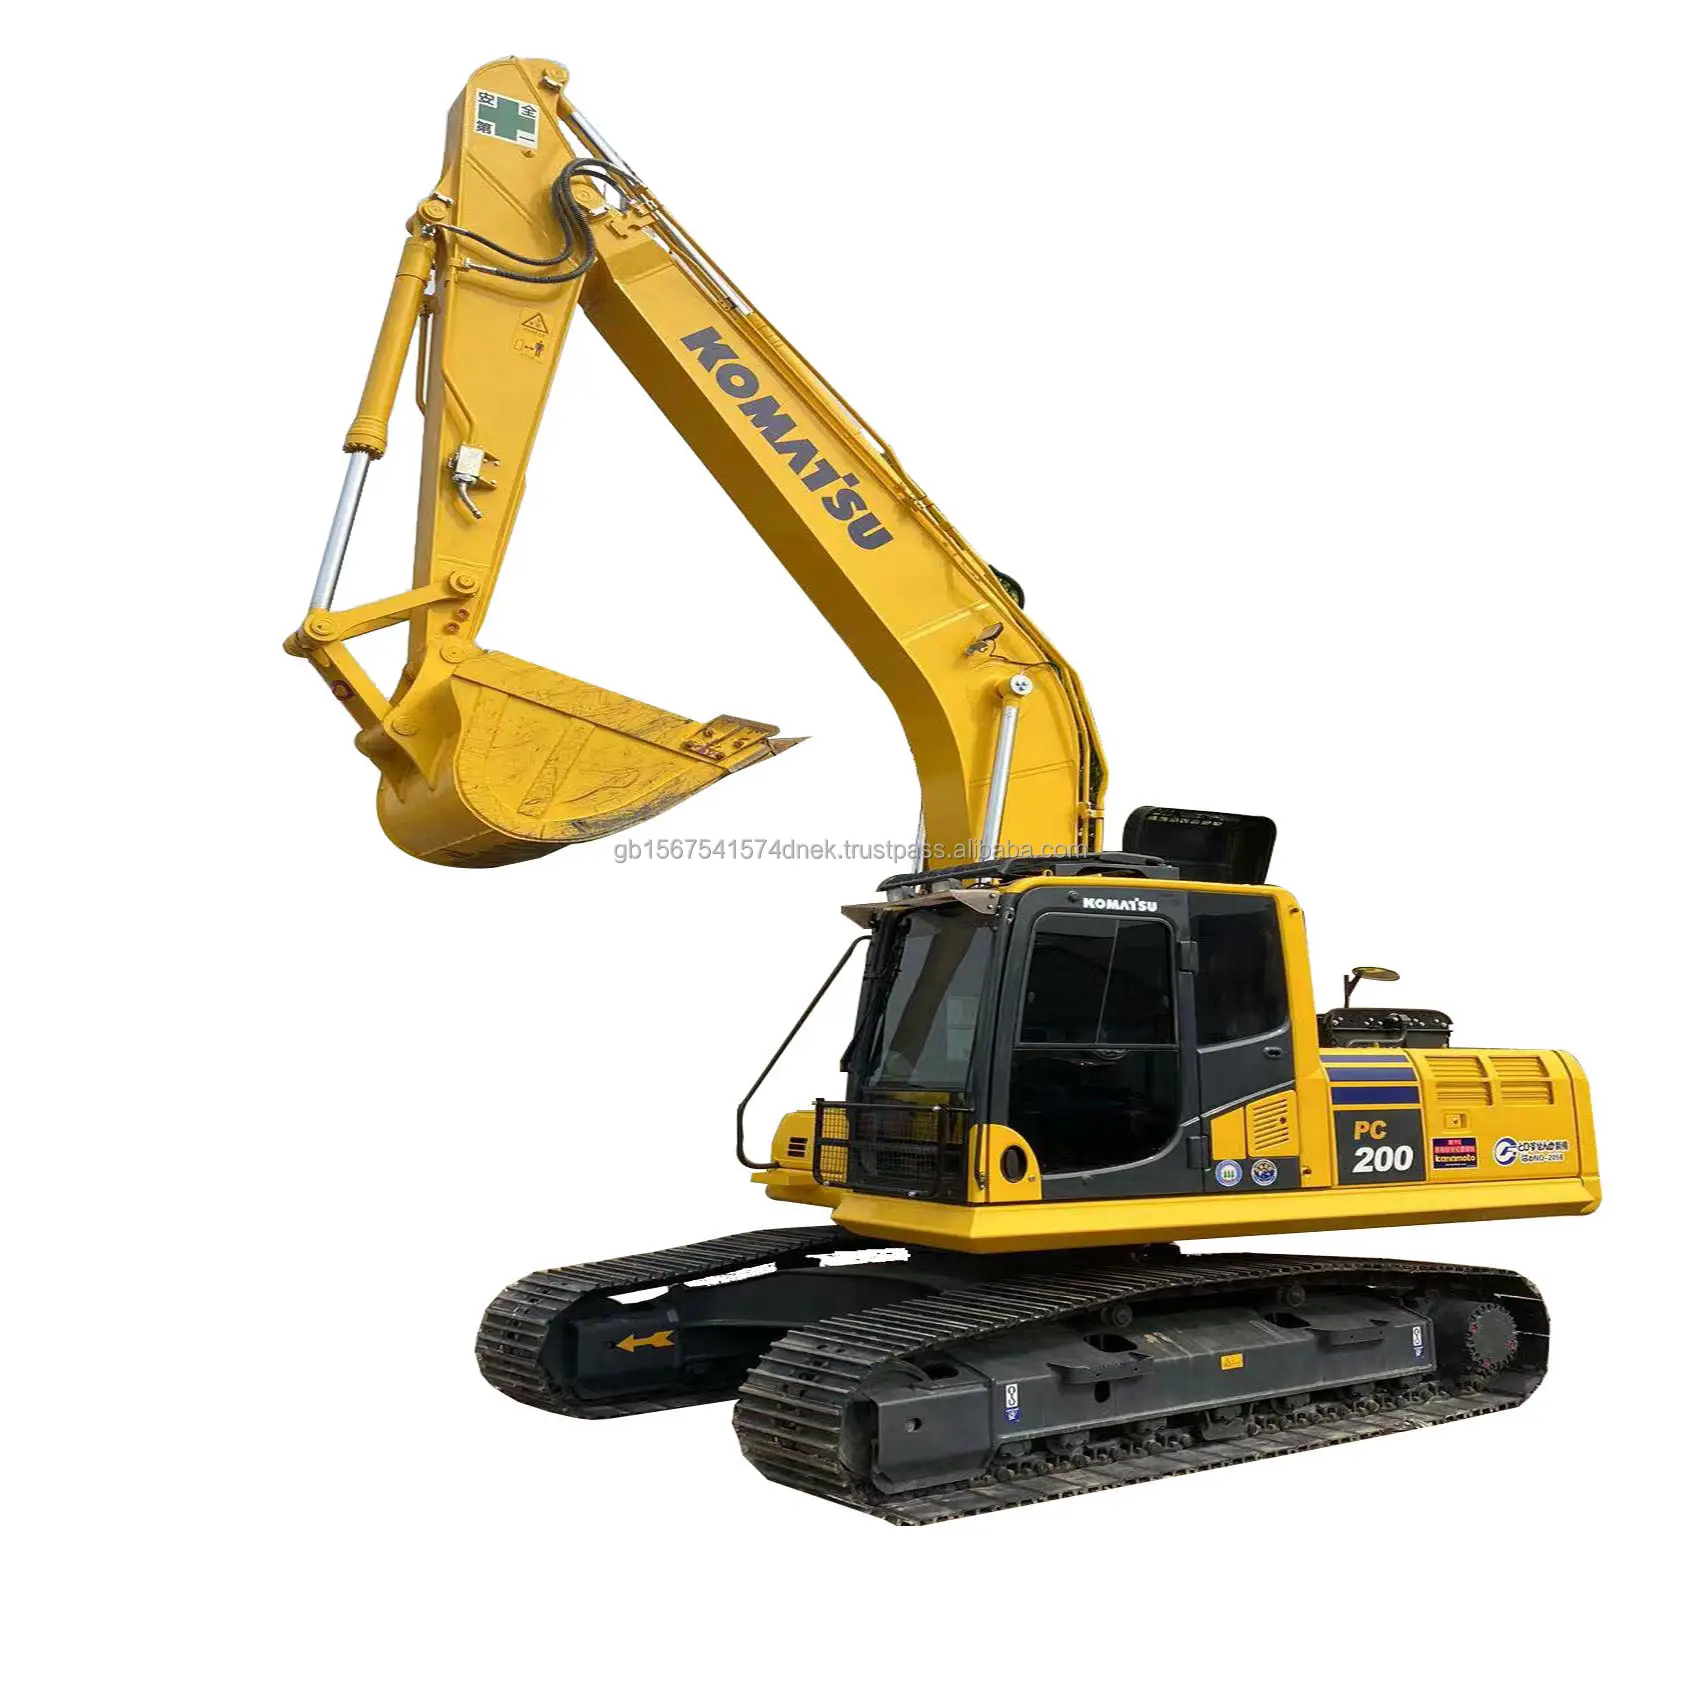 Factory price for authentic Japan second hand construction digger Komatsu pc200-8N1 excavator